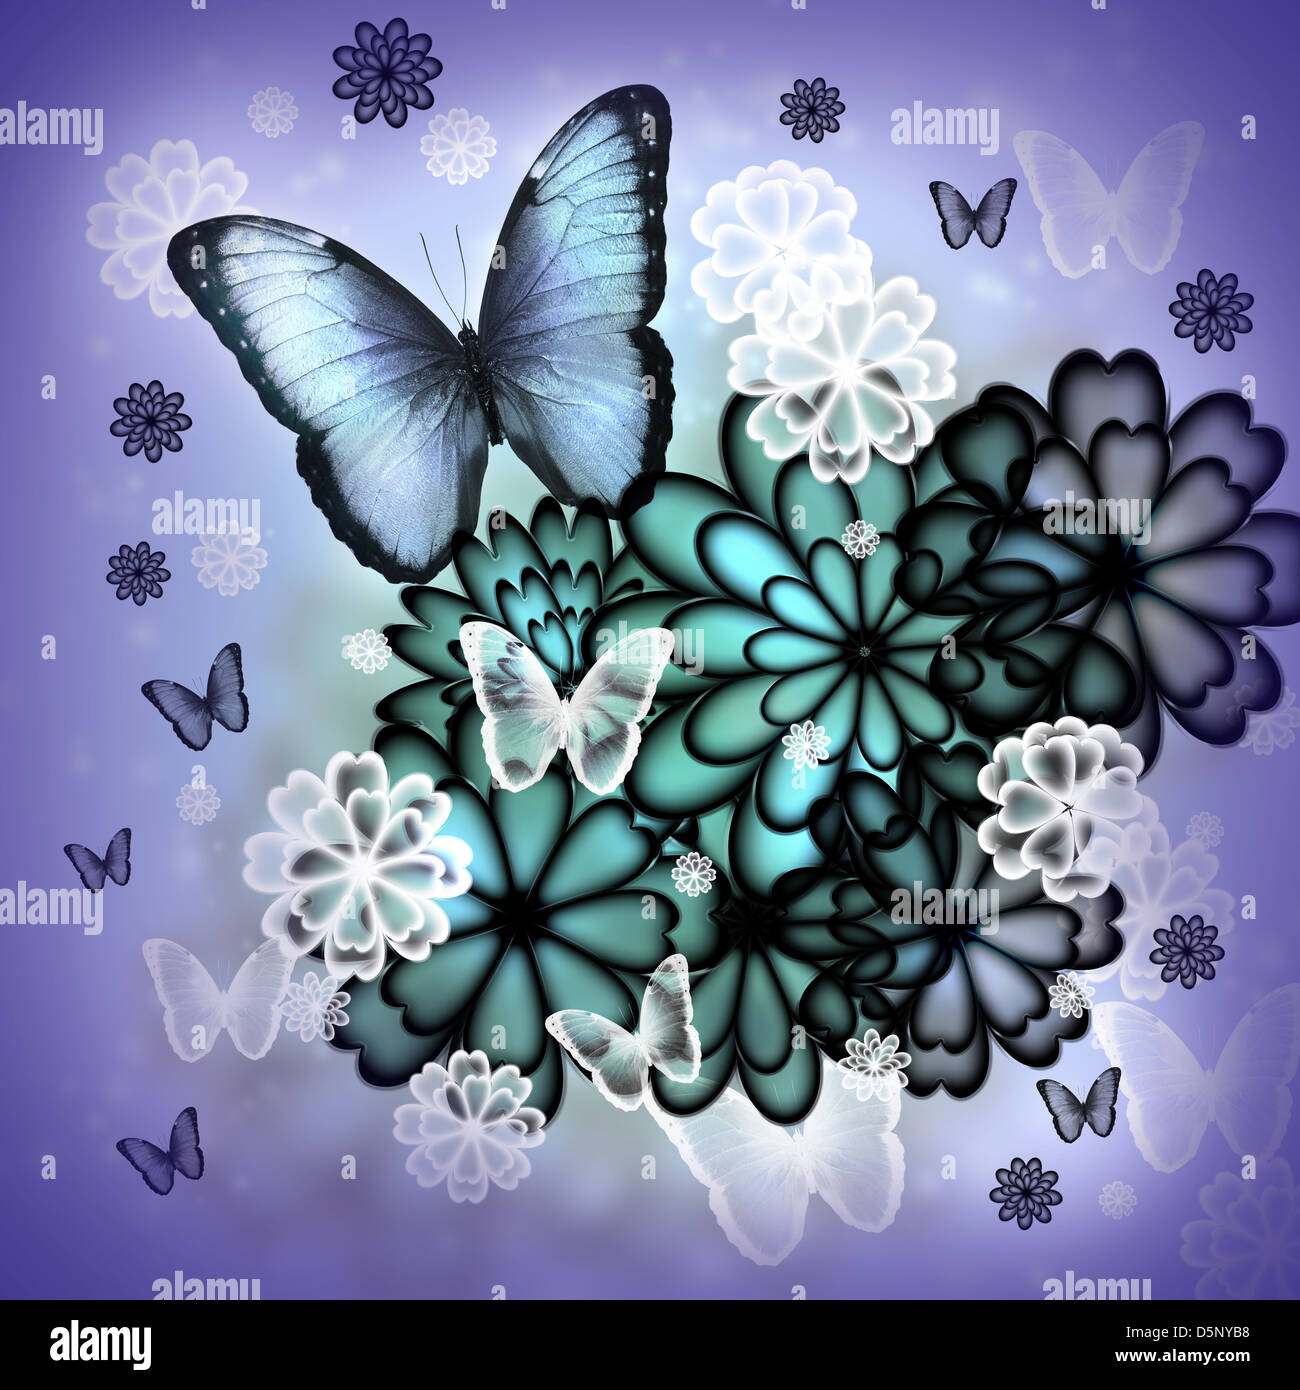 Butterflies and blossoms purple colored illustration Stock Photo